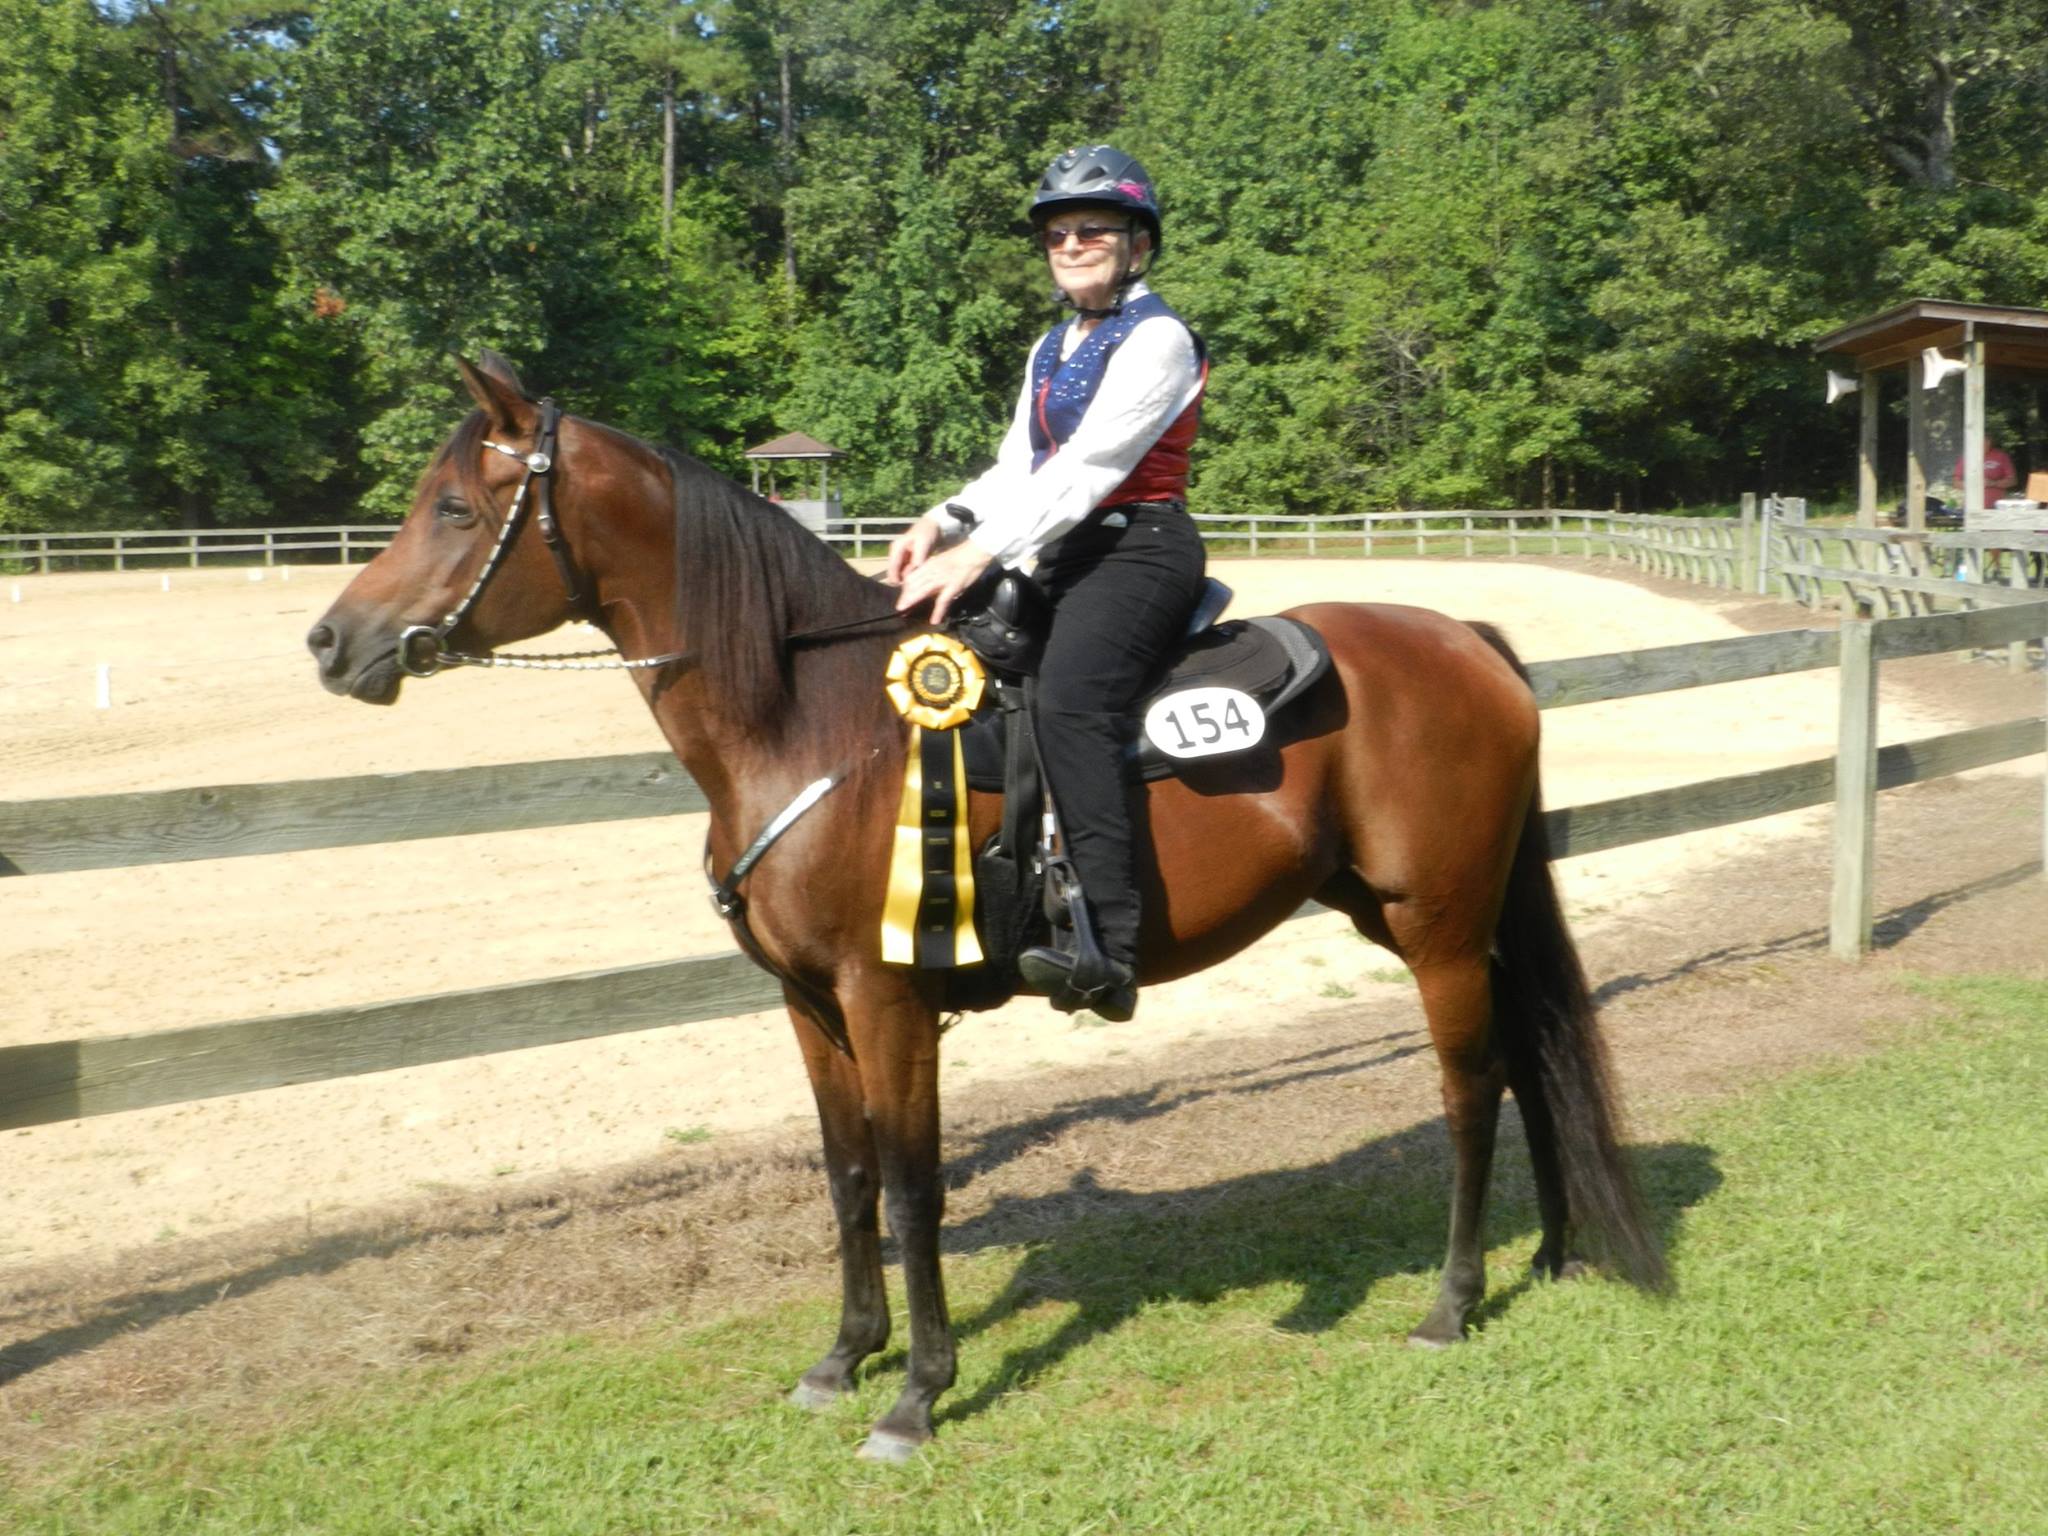 Century Club Ride - Leanna Bellinger and Fleeting Chance